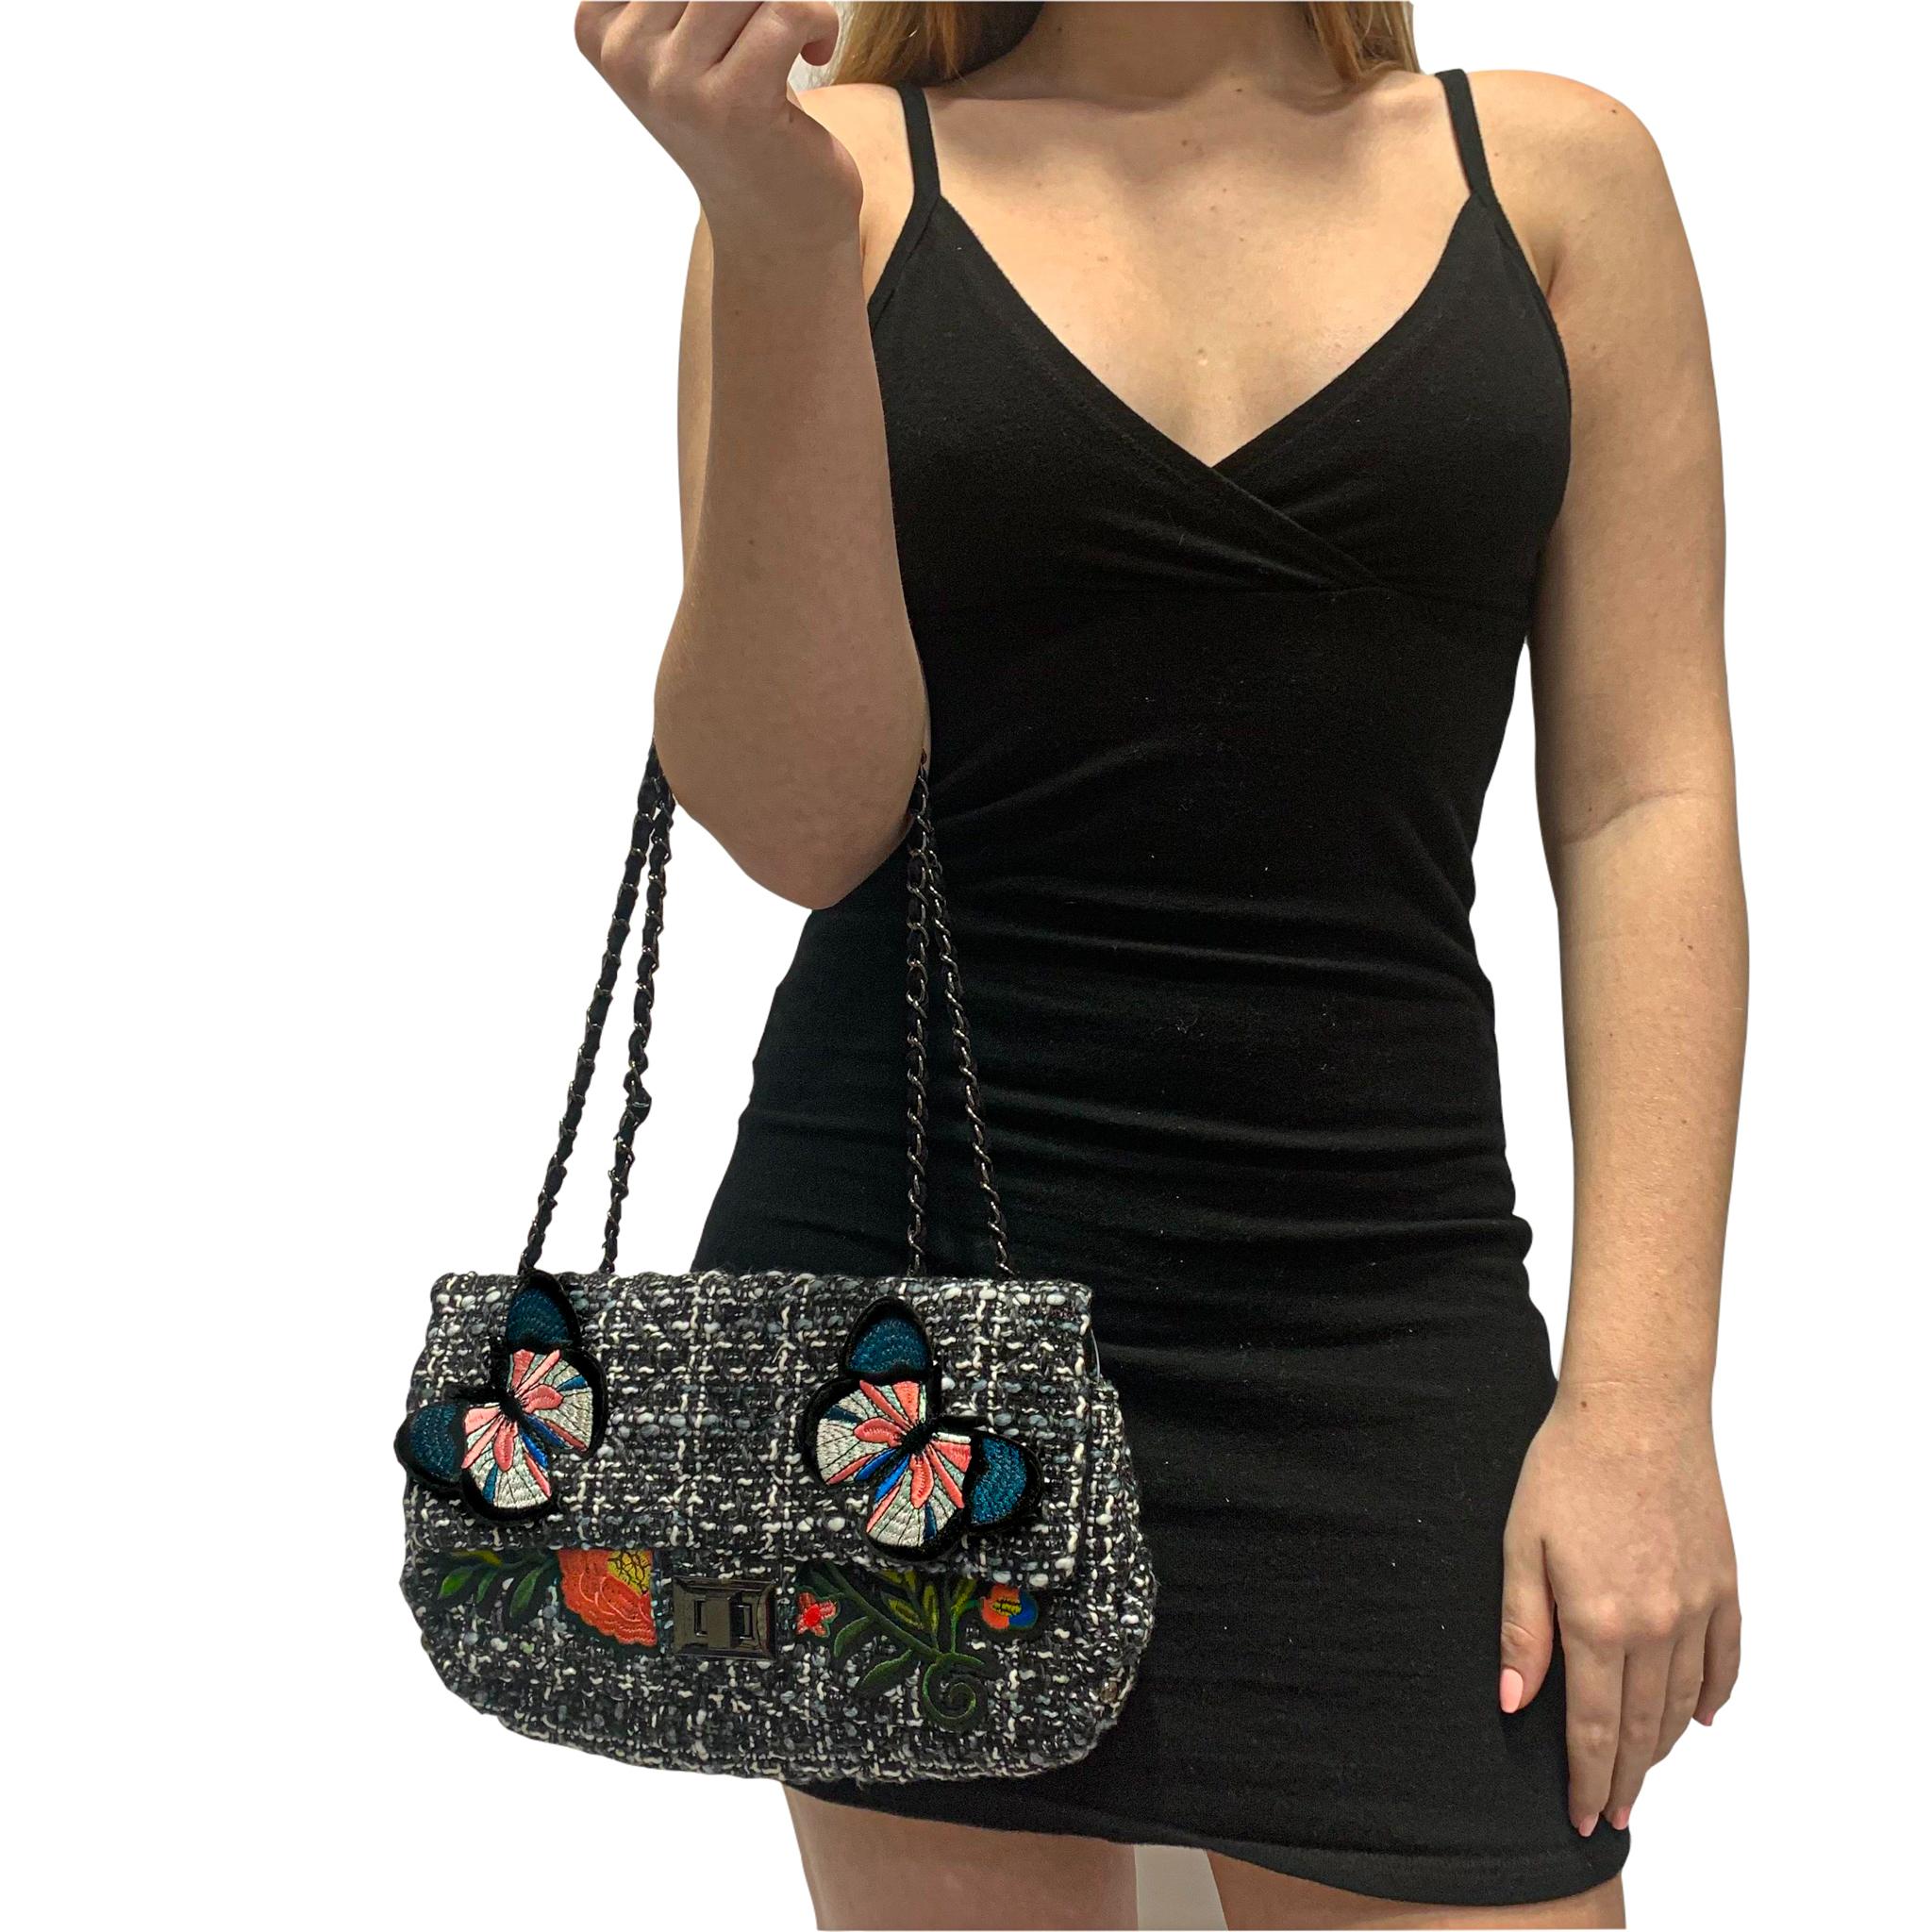  Classic flap bag with a plush felt woven through the chain for a softer and more elegant look.
Fold-over flap with turn-lock closure
Non-removable woven velvet chain crossbody strap
Zippered interior patch pocket                                    